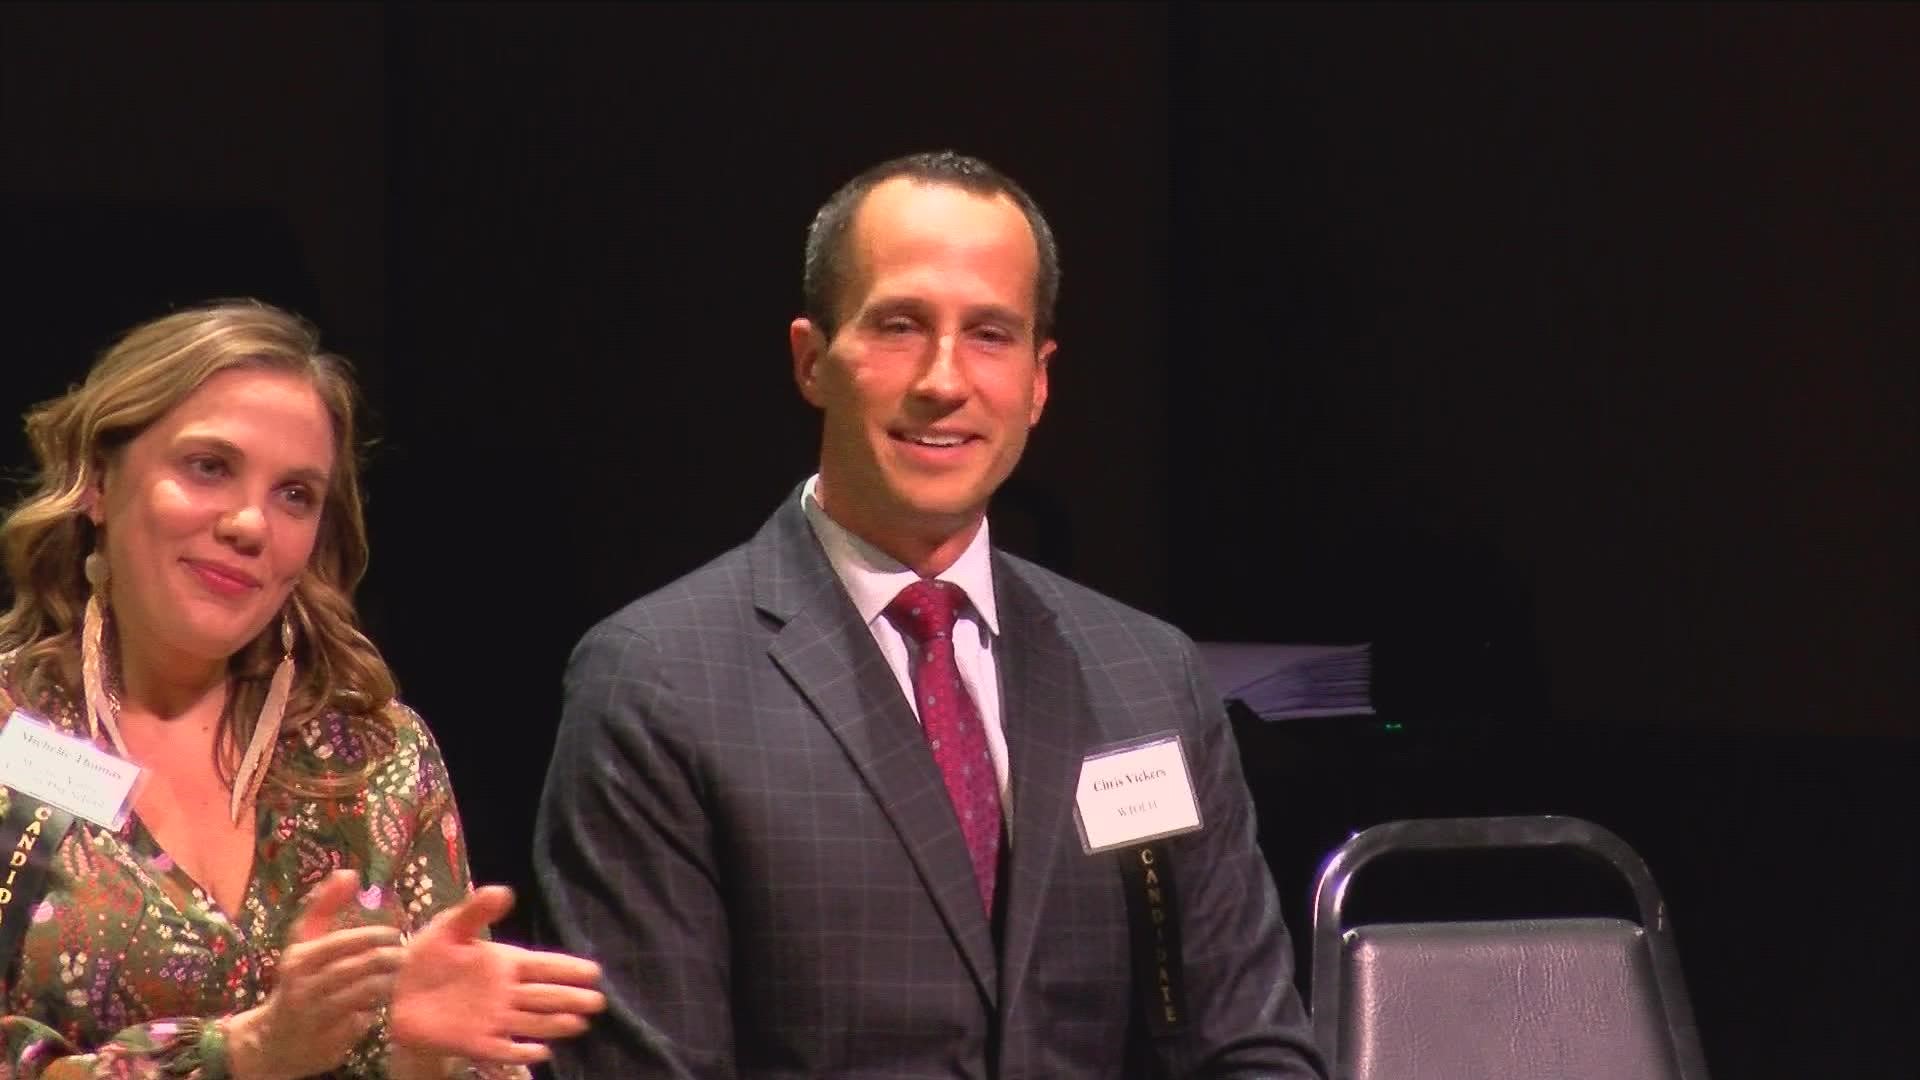 WTOL 11 Chief Meteorologist Chris Vickers received the 20 under 40 Leadership Recognition Award, announced Tuesday. Vickers has been with WTOL 11 for 14 years.